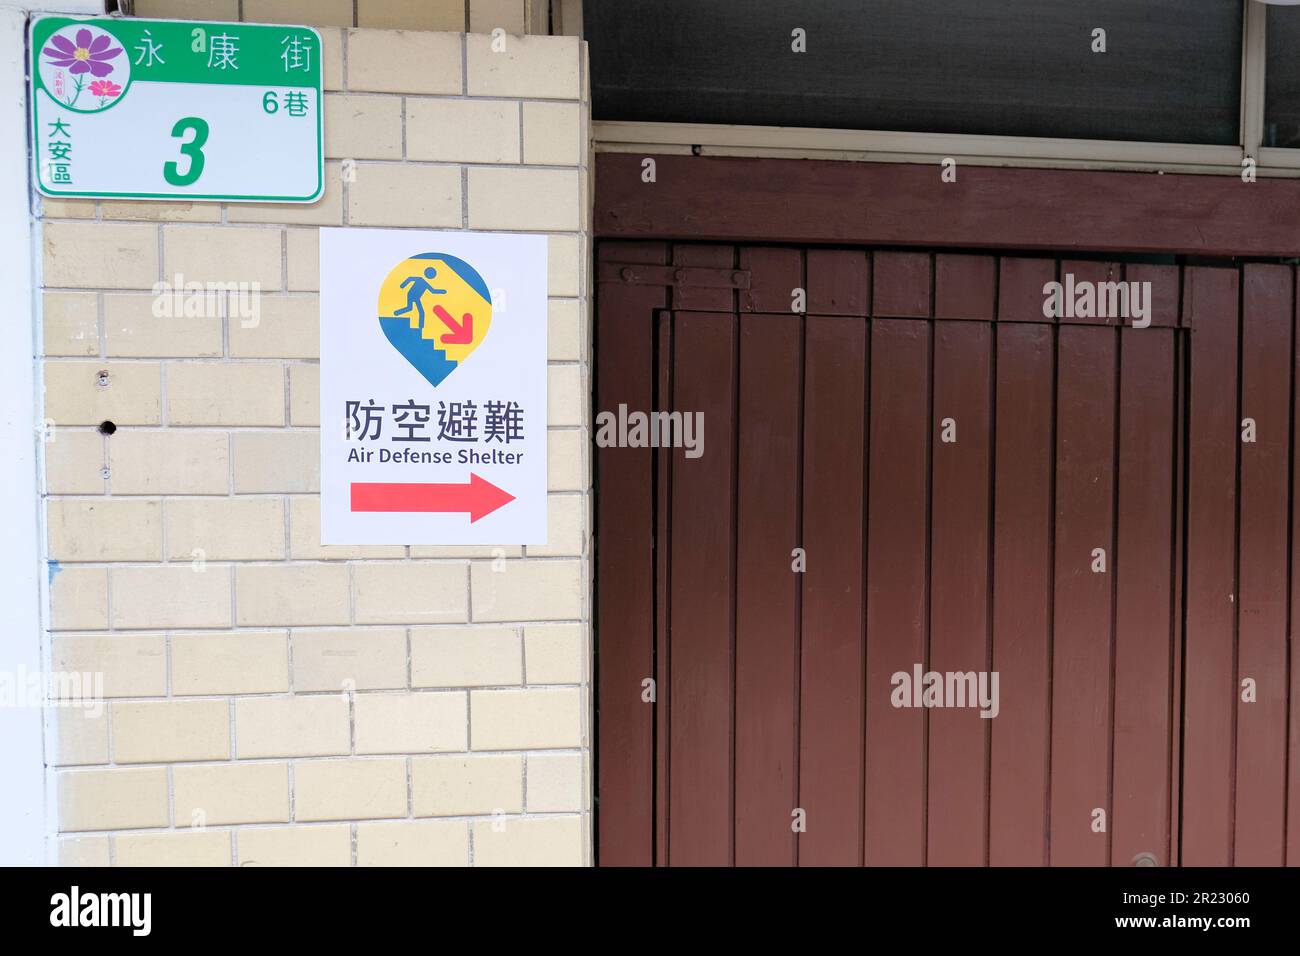 Air Defense Shelter sign in public spaces directing civilians to shelters for protection and safety in case of invading attacks; Taipei, Taiwan. Stock Photo